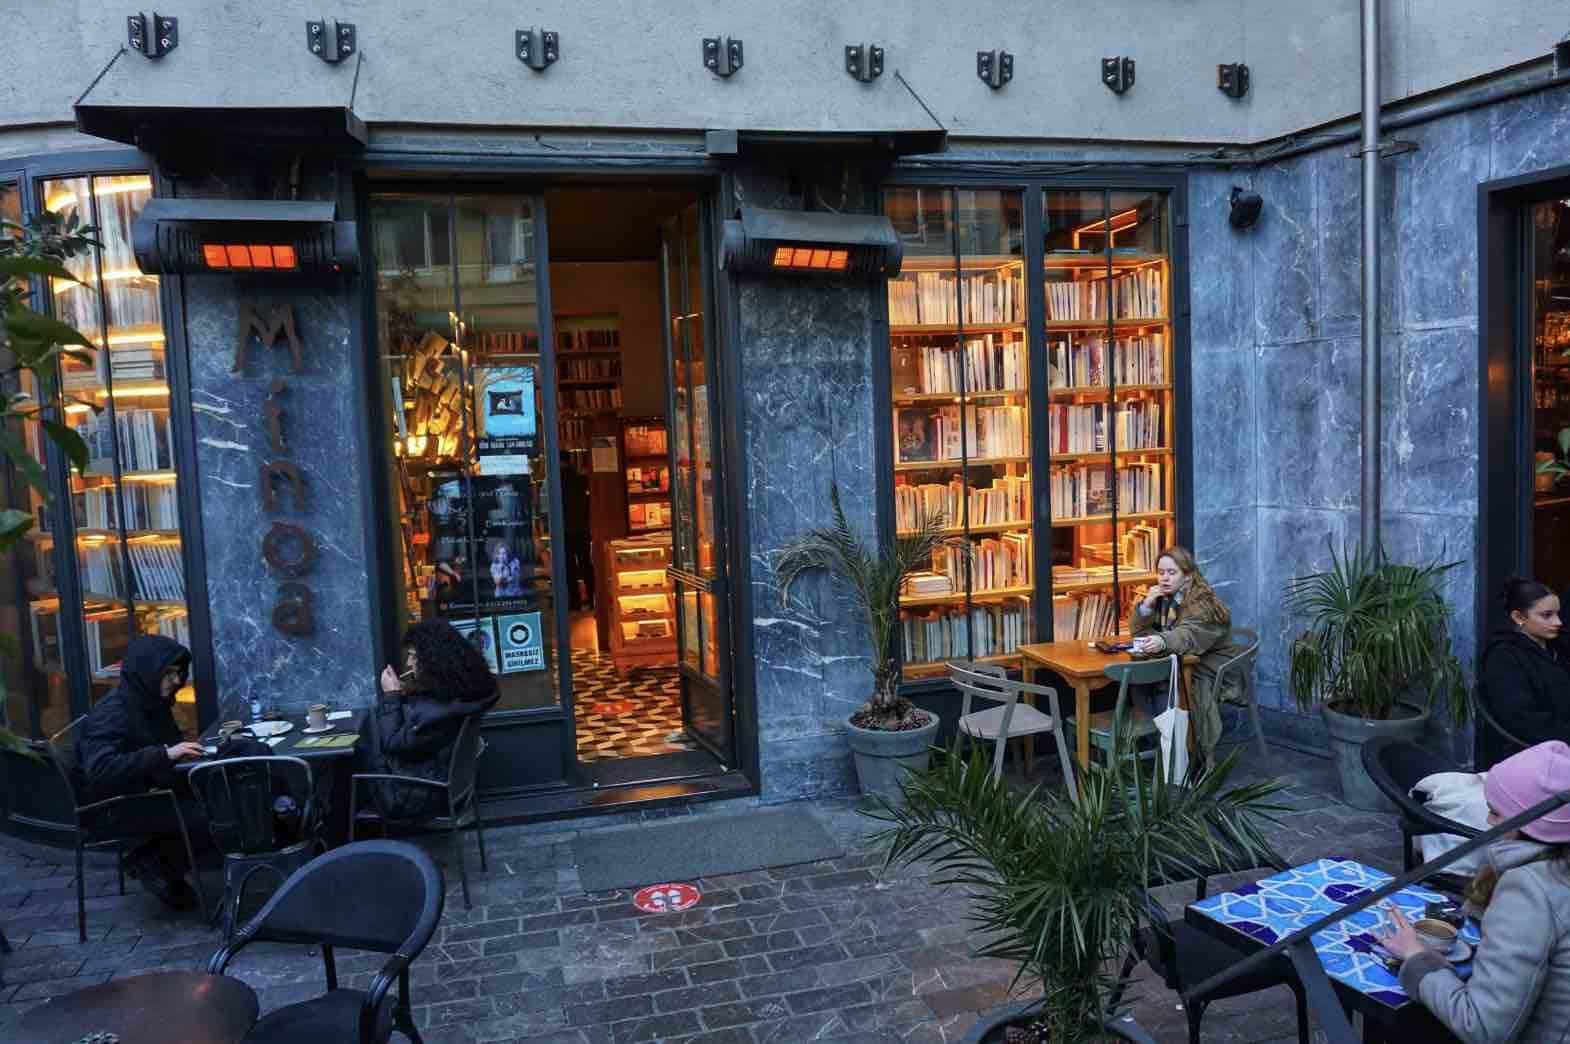 A bookstore cafe with people sitting at tables outside